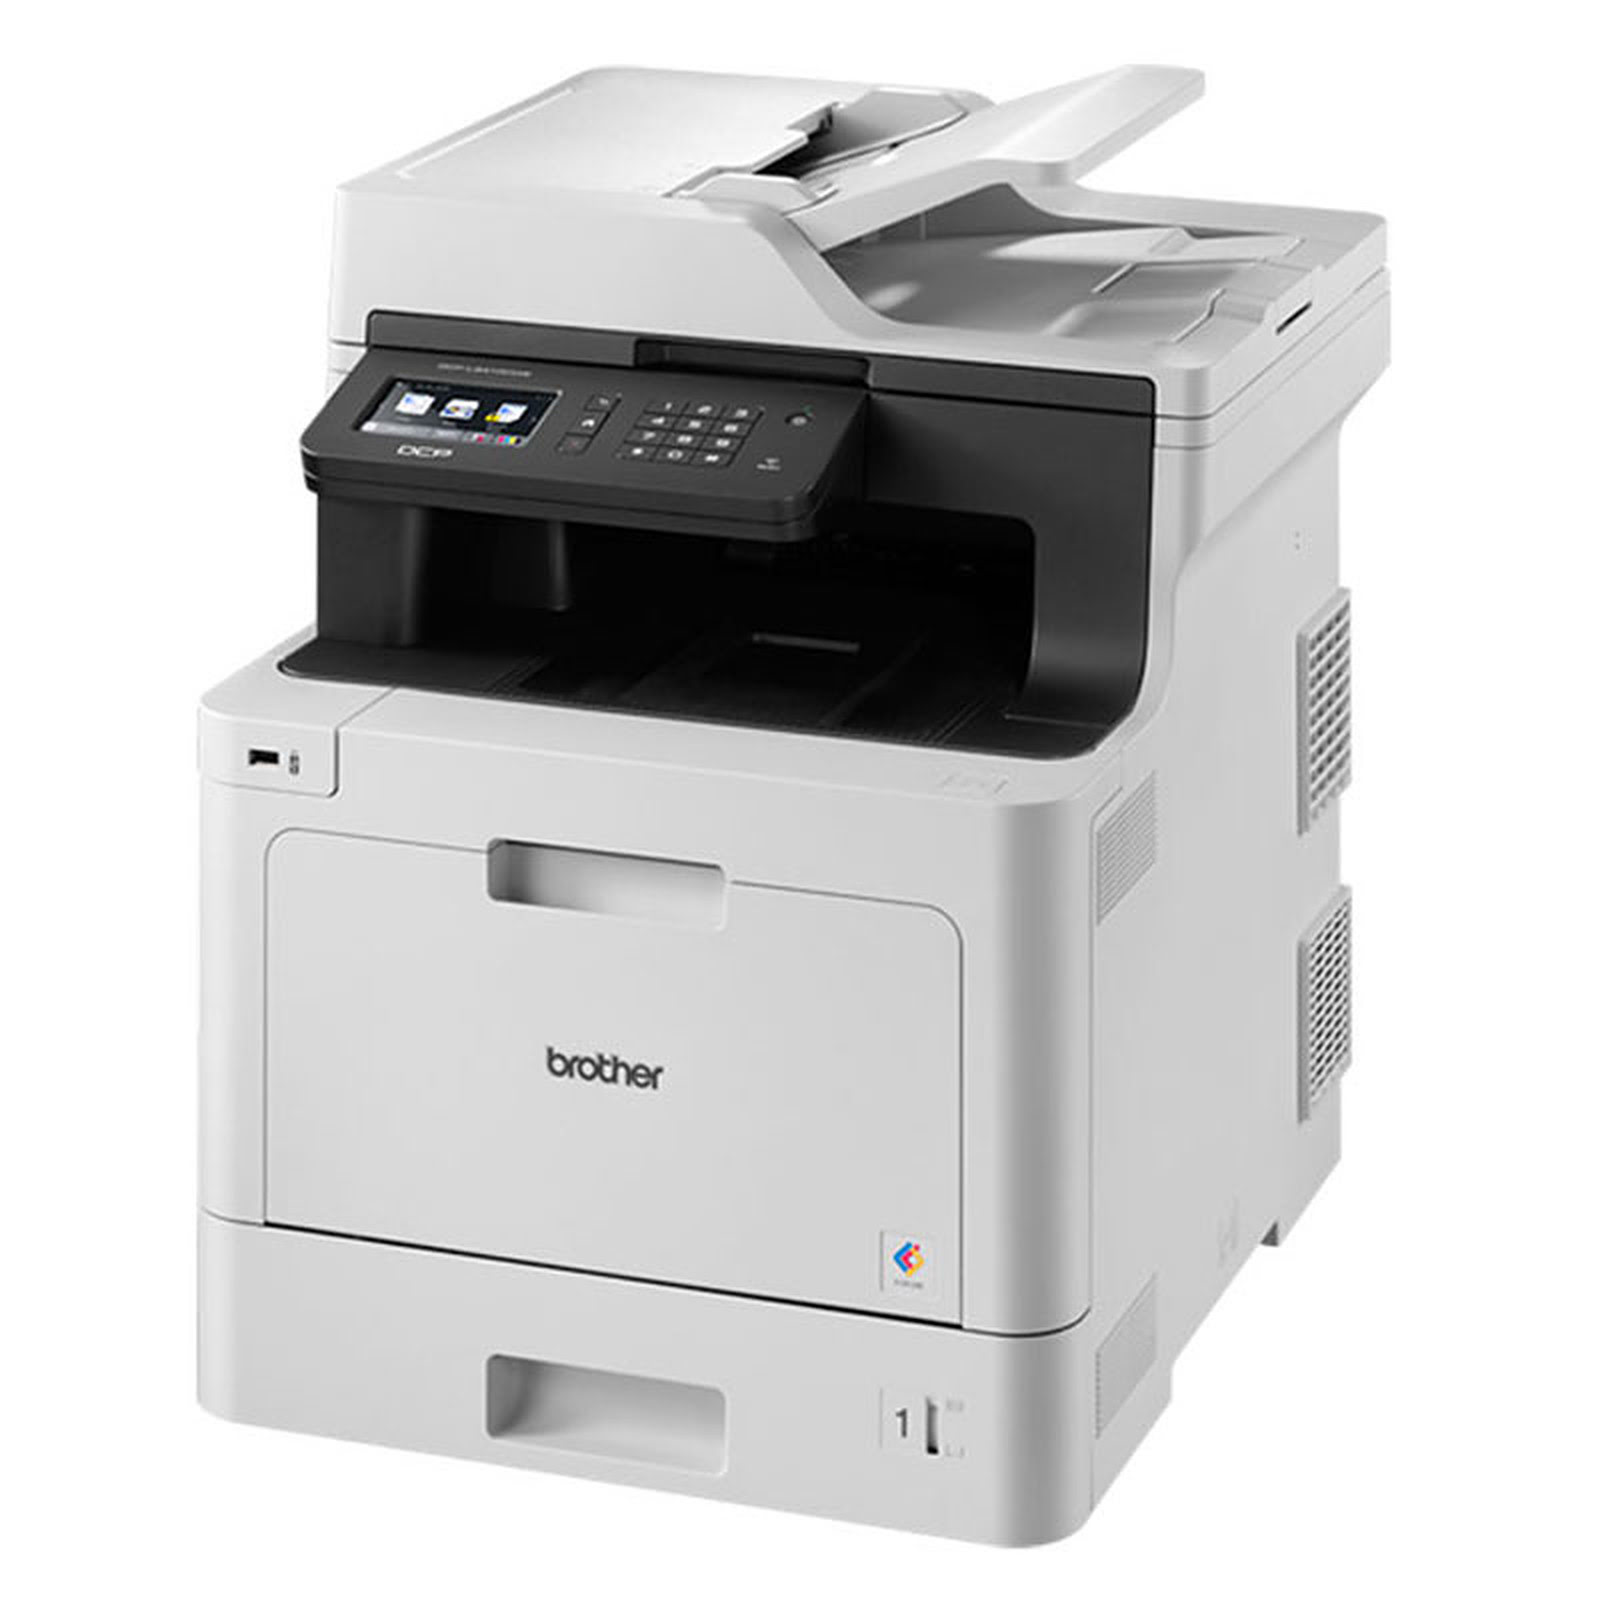 Imprimante multifonction Brother DCP-L8410CDW - grosbill-pro.com - 1